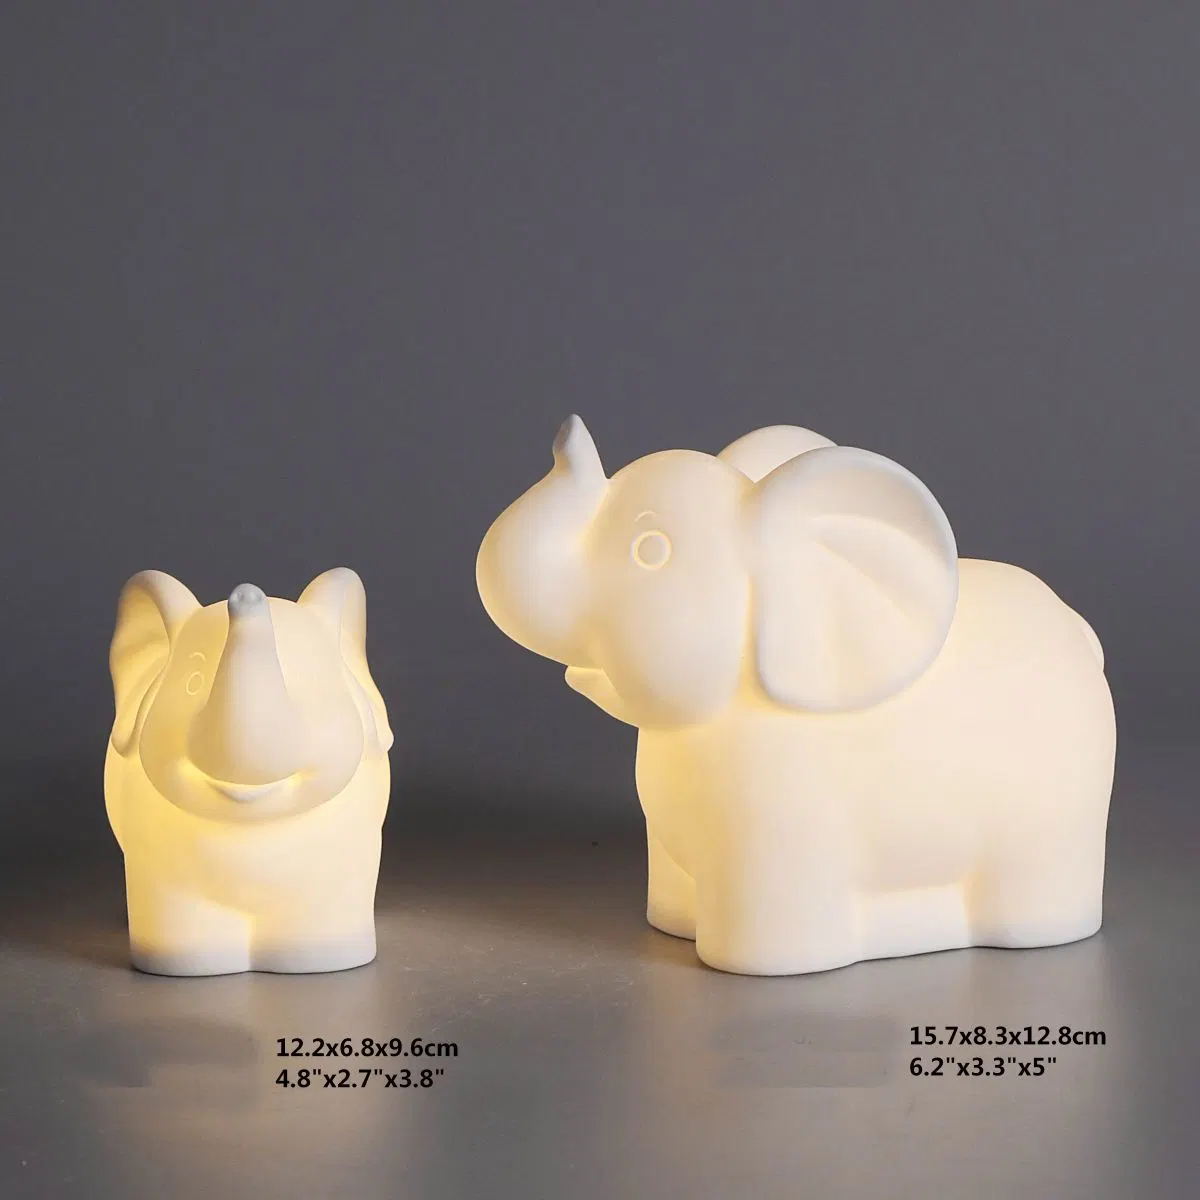 Set of 2 Ceramic Elephant Statue LED Table Decoration Holiday Easter Decor Cute Animal Gift for Kidceramic Easter Animal Statue Decoration with LED Light